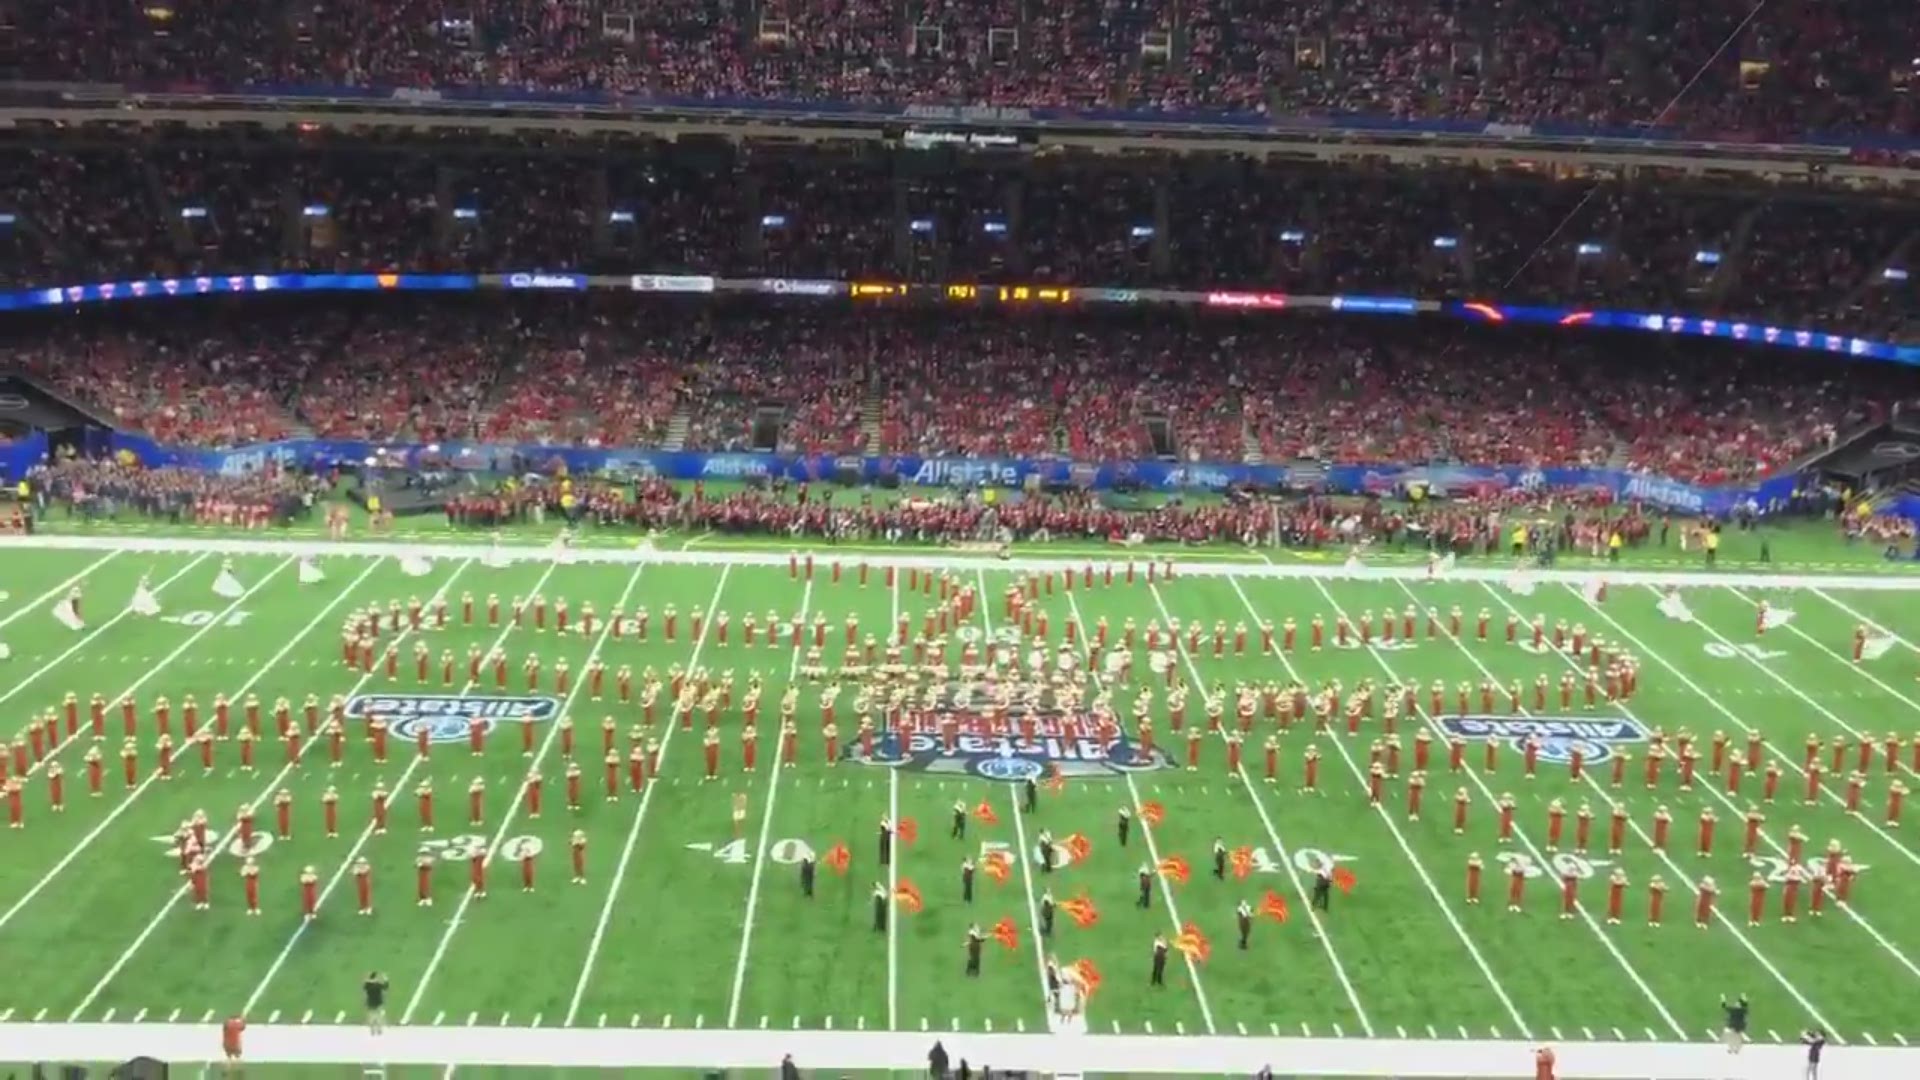 Paying tribute to Selena, Sergio Chapa captured this performance of "Como La Flor" by the Texas Longhorn Band at the Sugar Bowl.